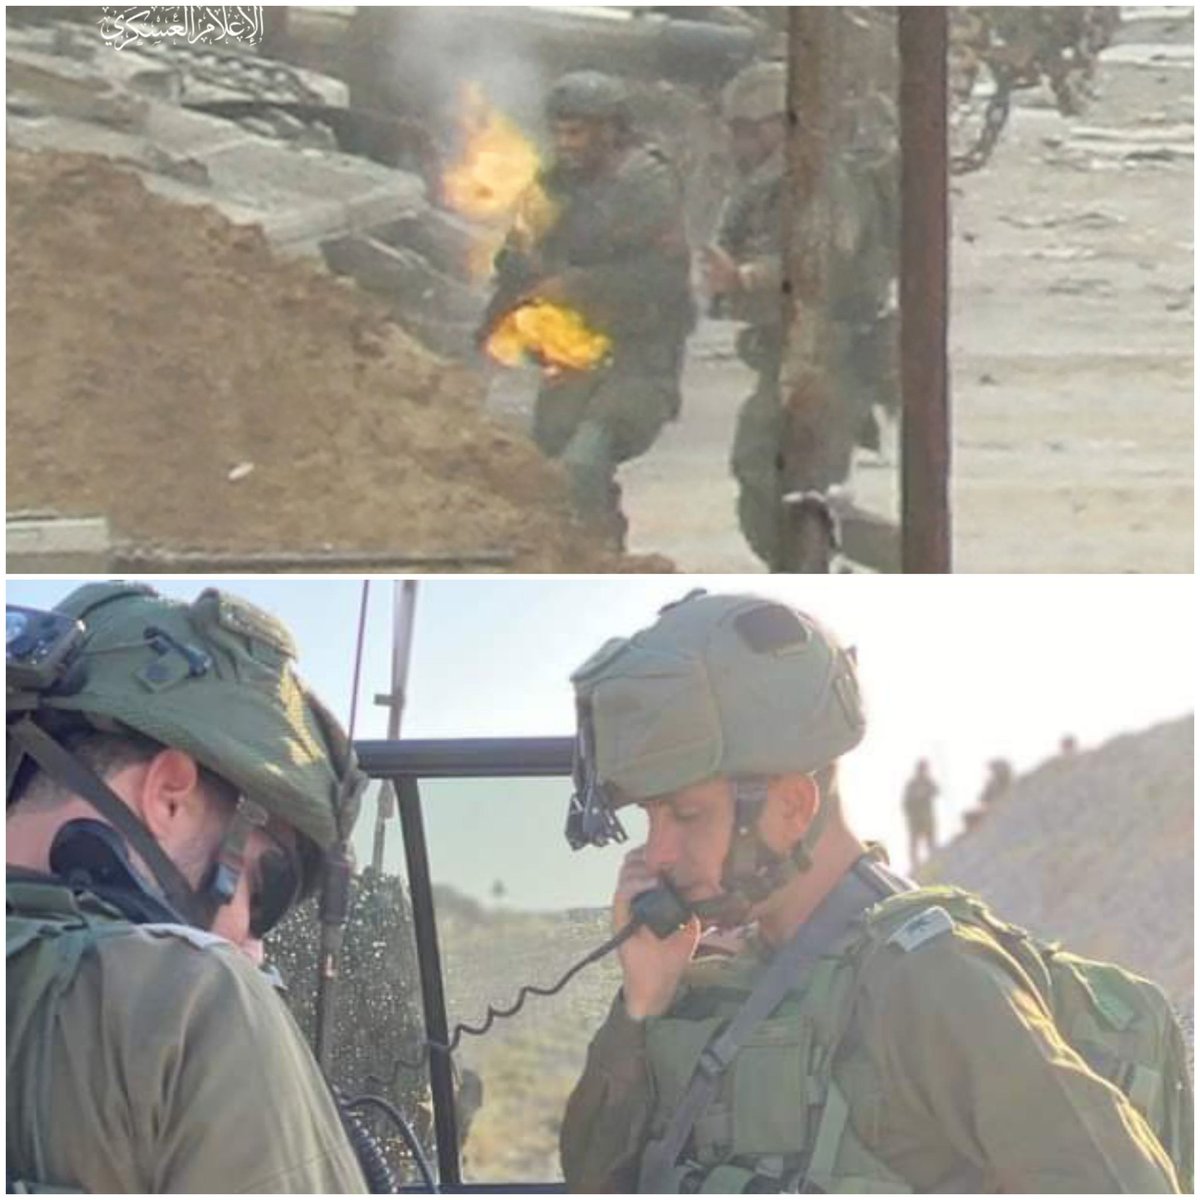 Deputy Superintendent of the Defense System - Brigadier General Yogev Bar Sheshet was the one who was seriously injured by the sniper's bullets. If he survives death, he will live his life Disabled pelvic injury. 🎉🎉🎉